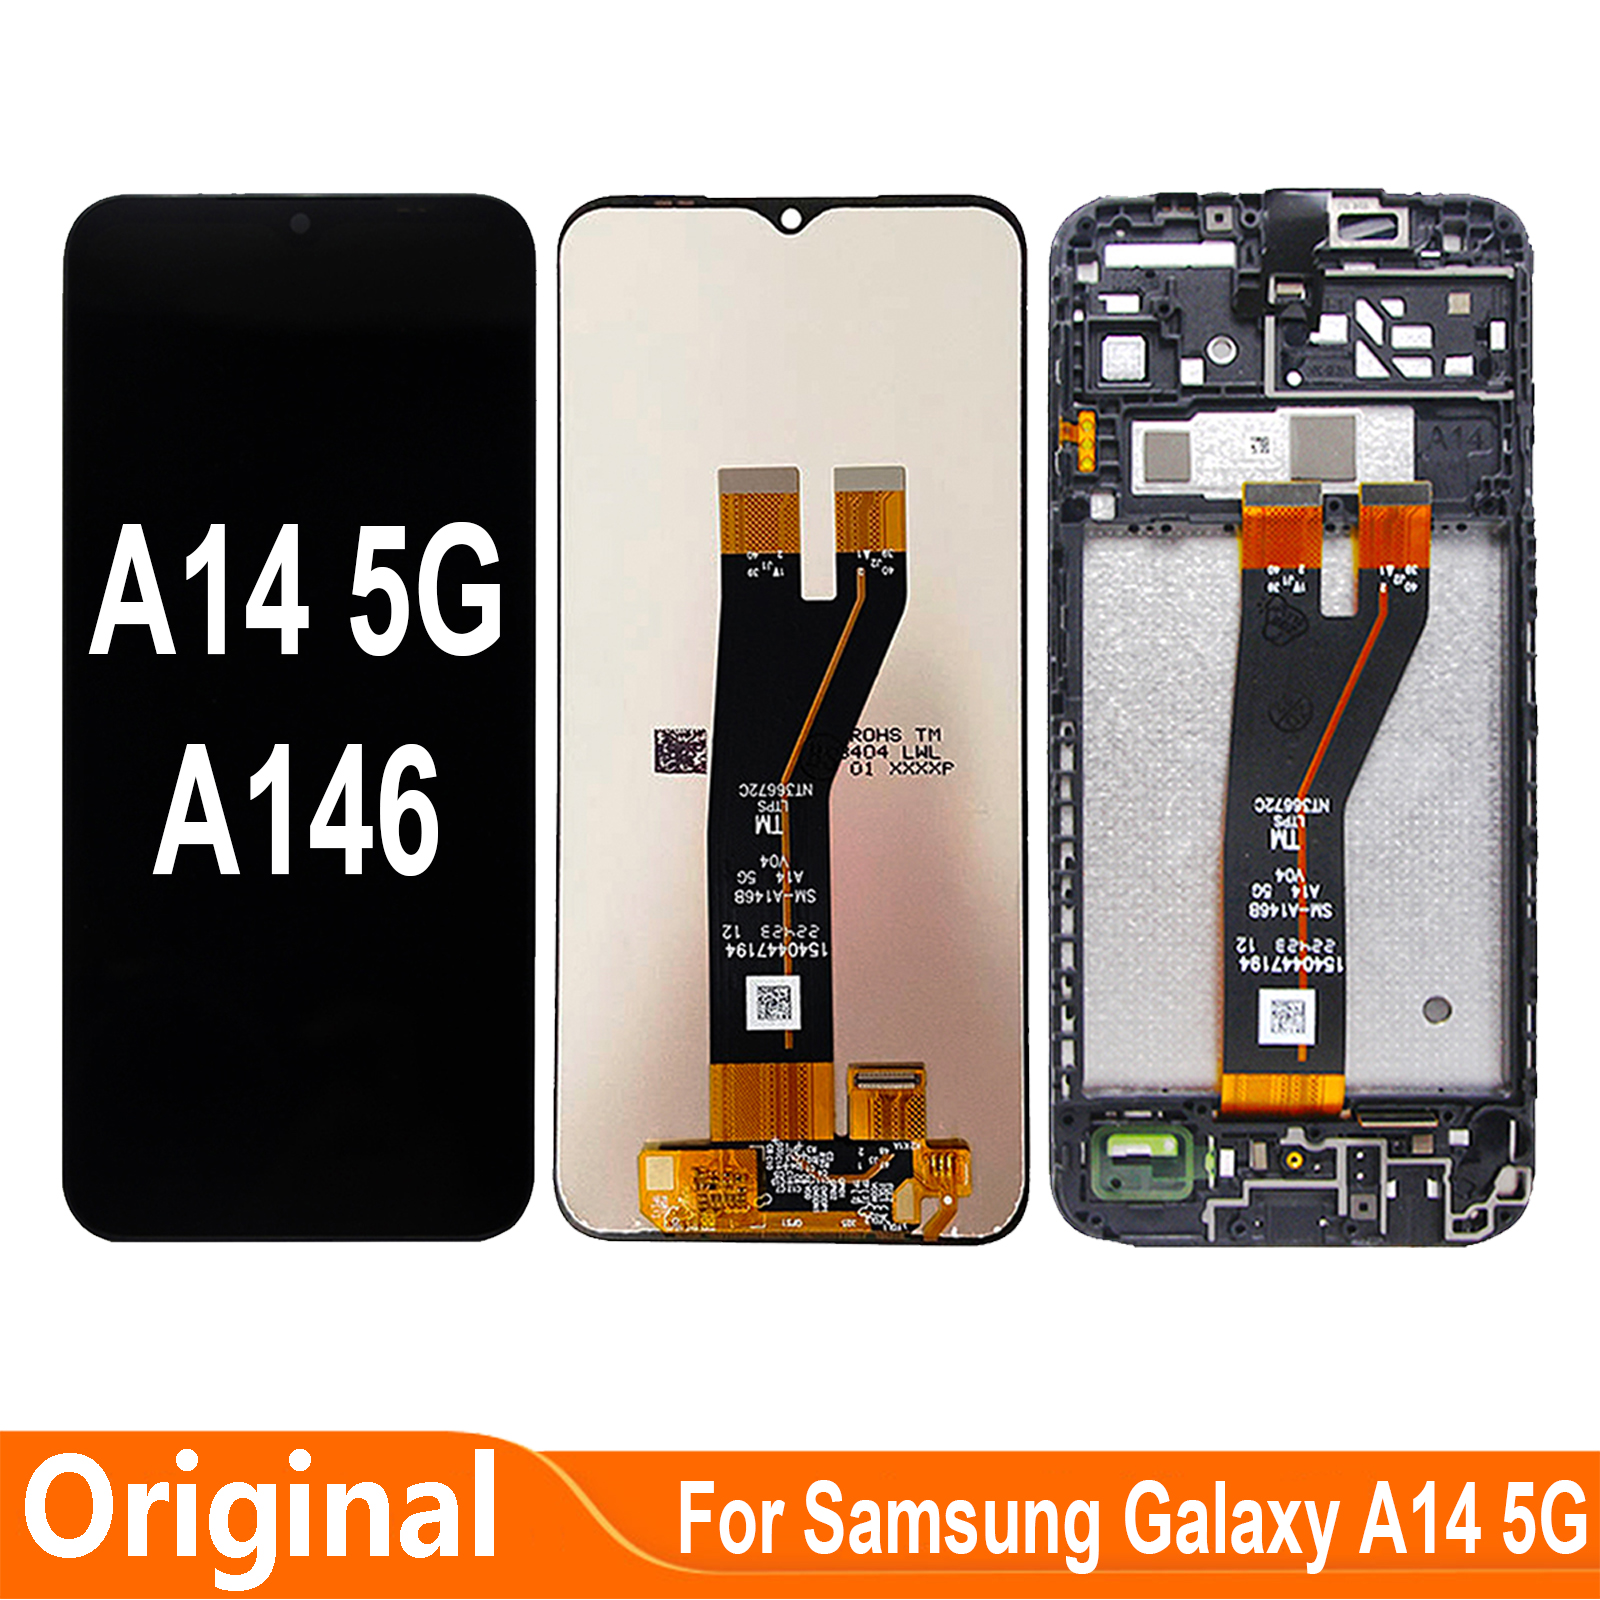 Original-6-6-For-Samsung-Galaxy-A14-5G-SM-A146B-LCD-Display-Touch-Screen-Digitizer-Assembly